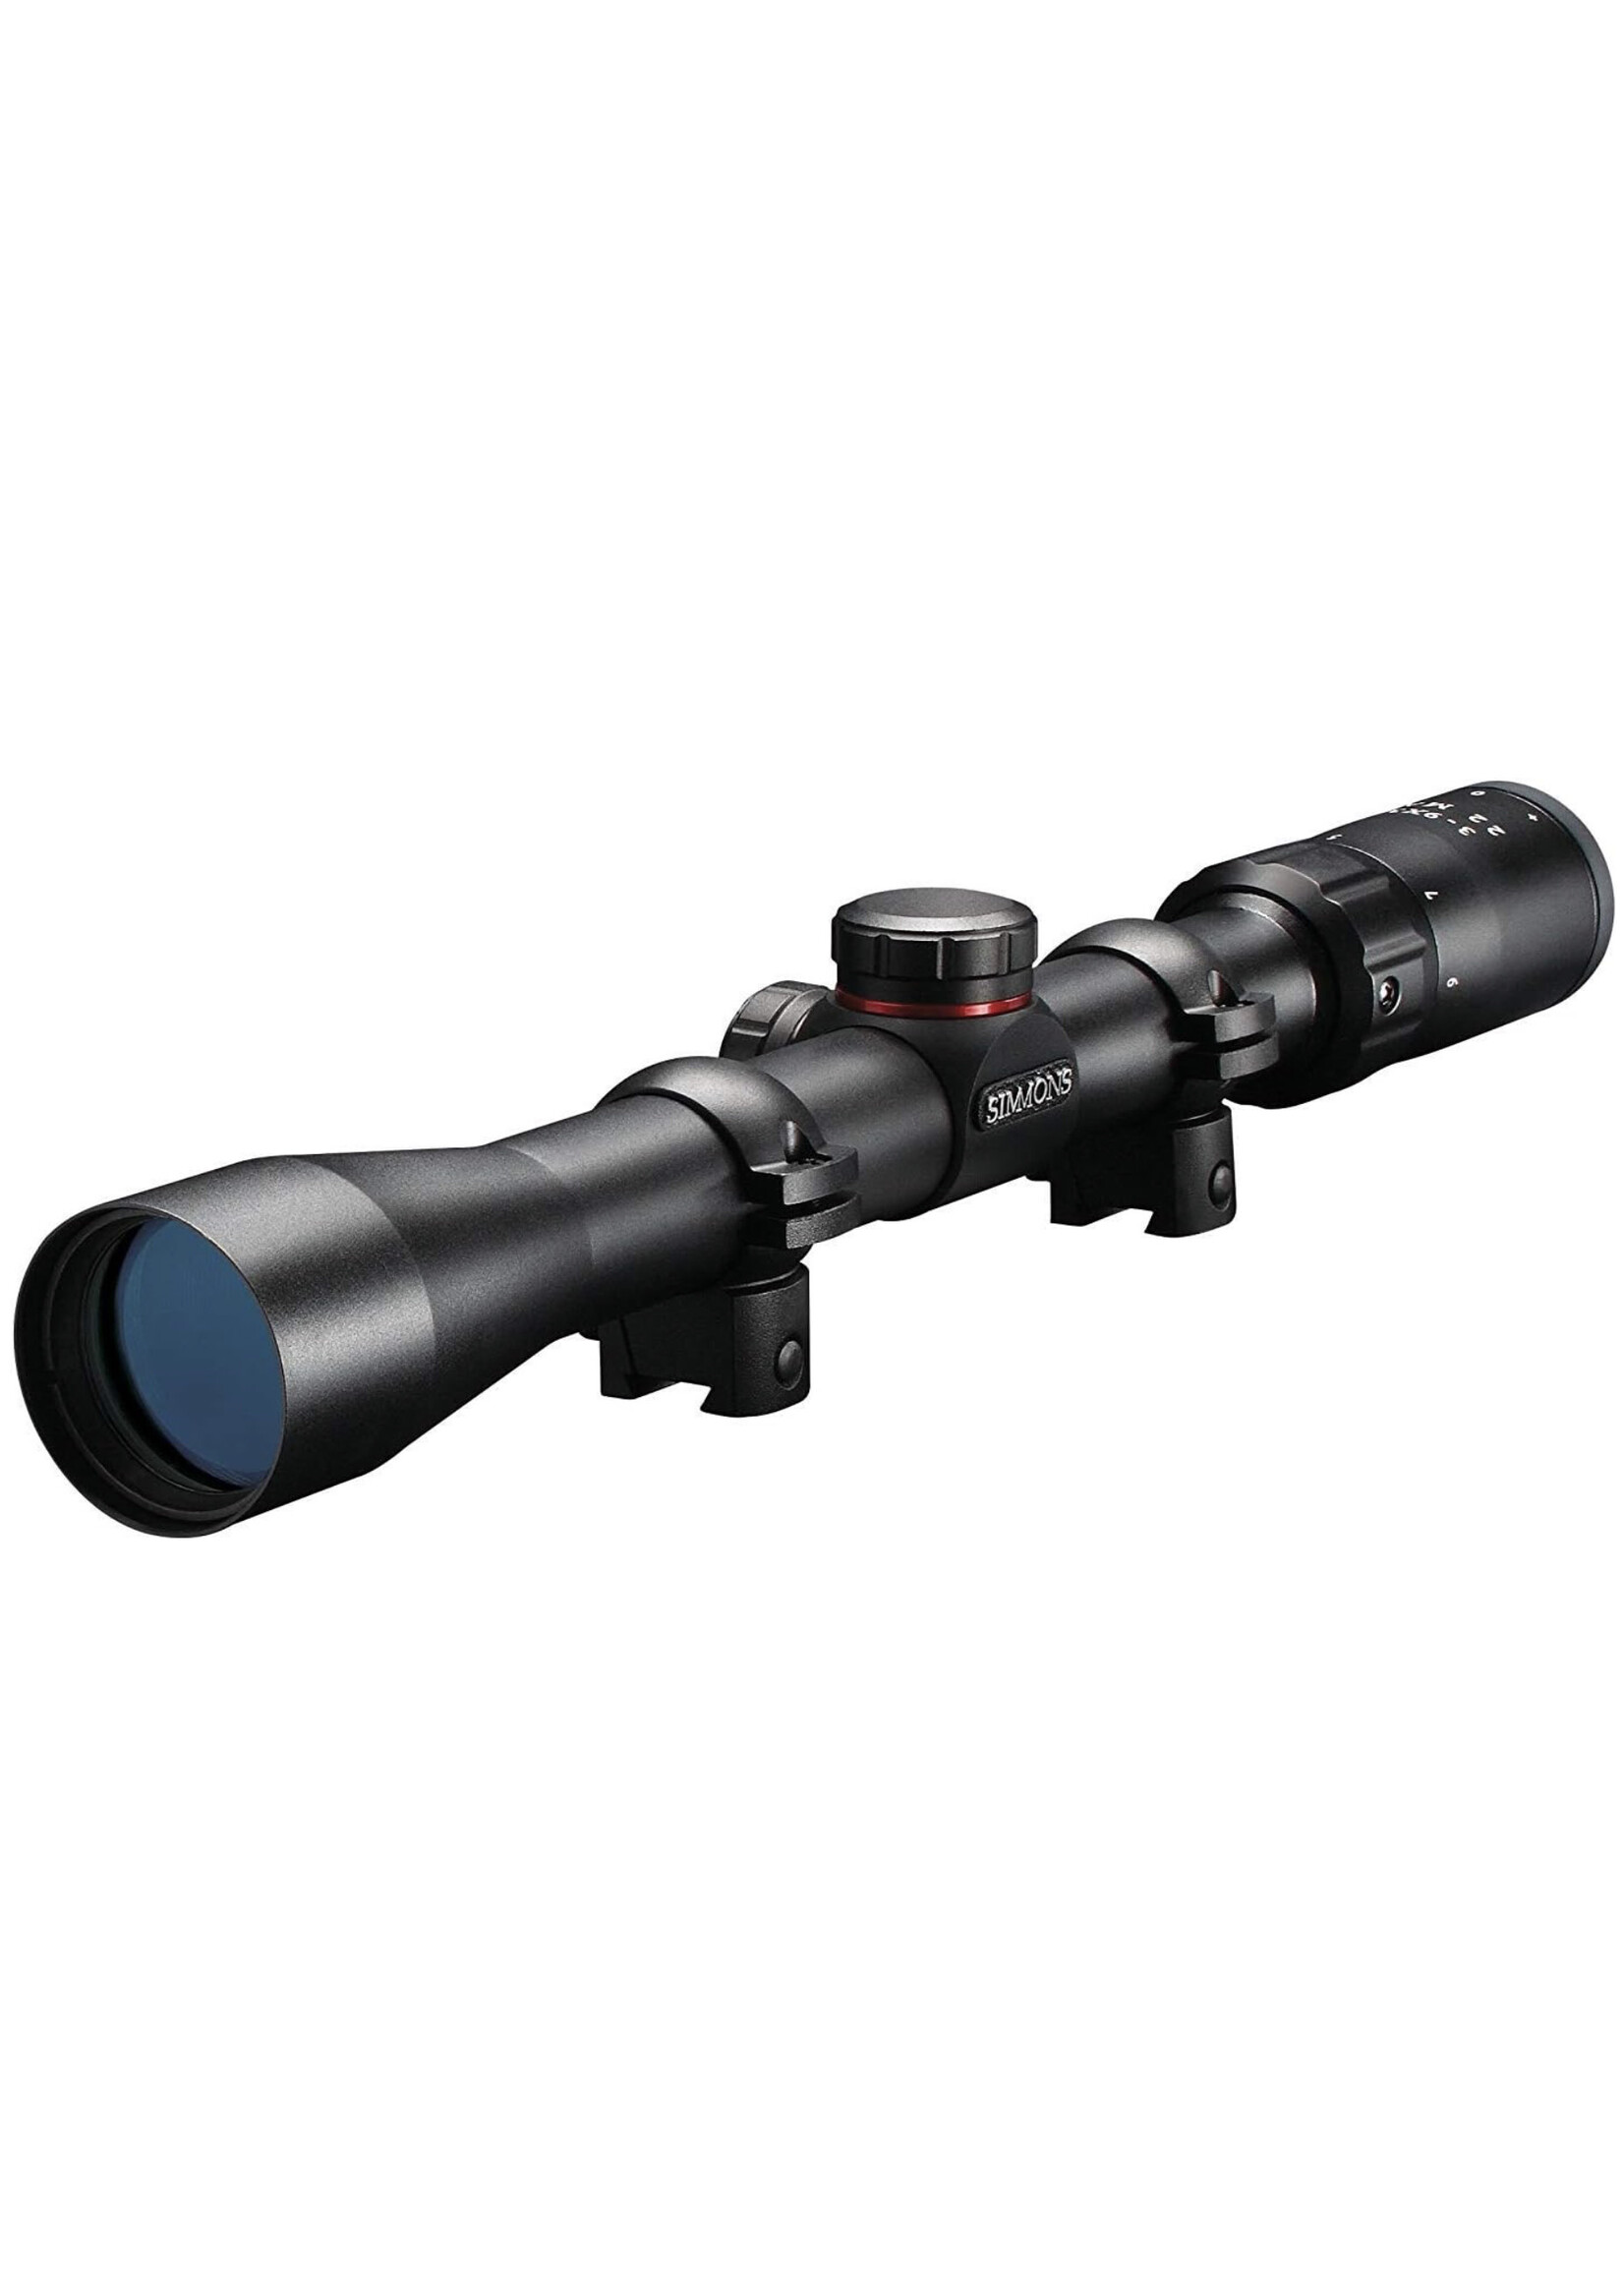 SIMMONS SIMMONS 3-9 X 32 SCOPE W/RINGS